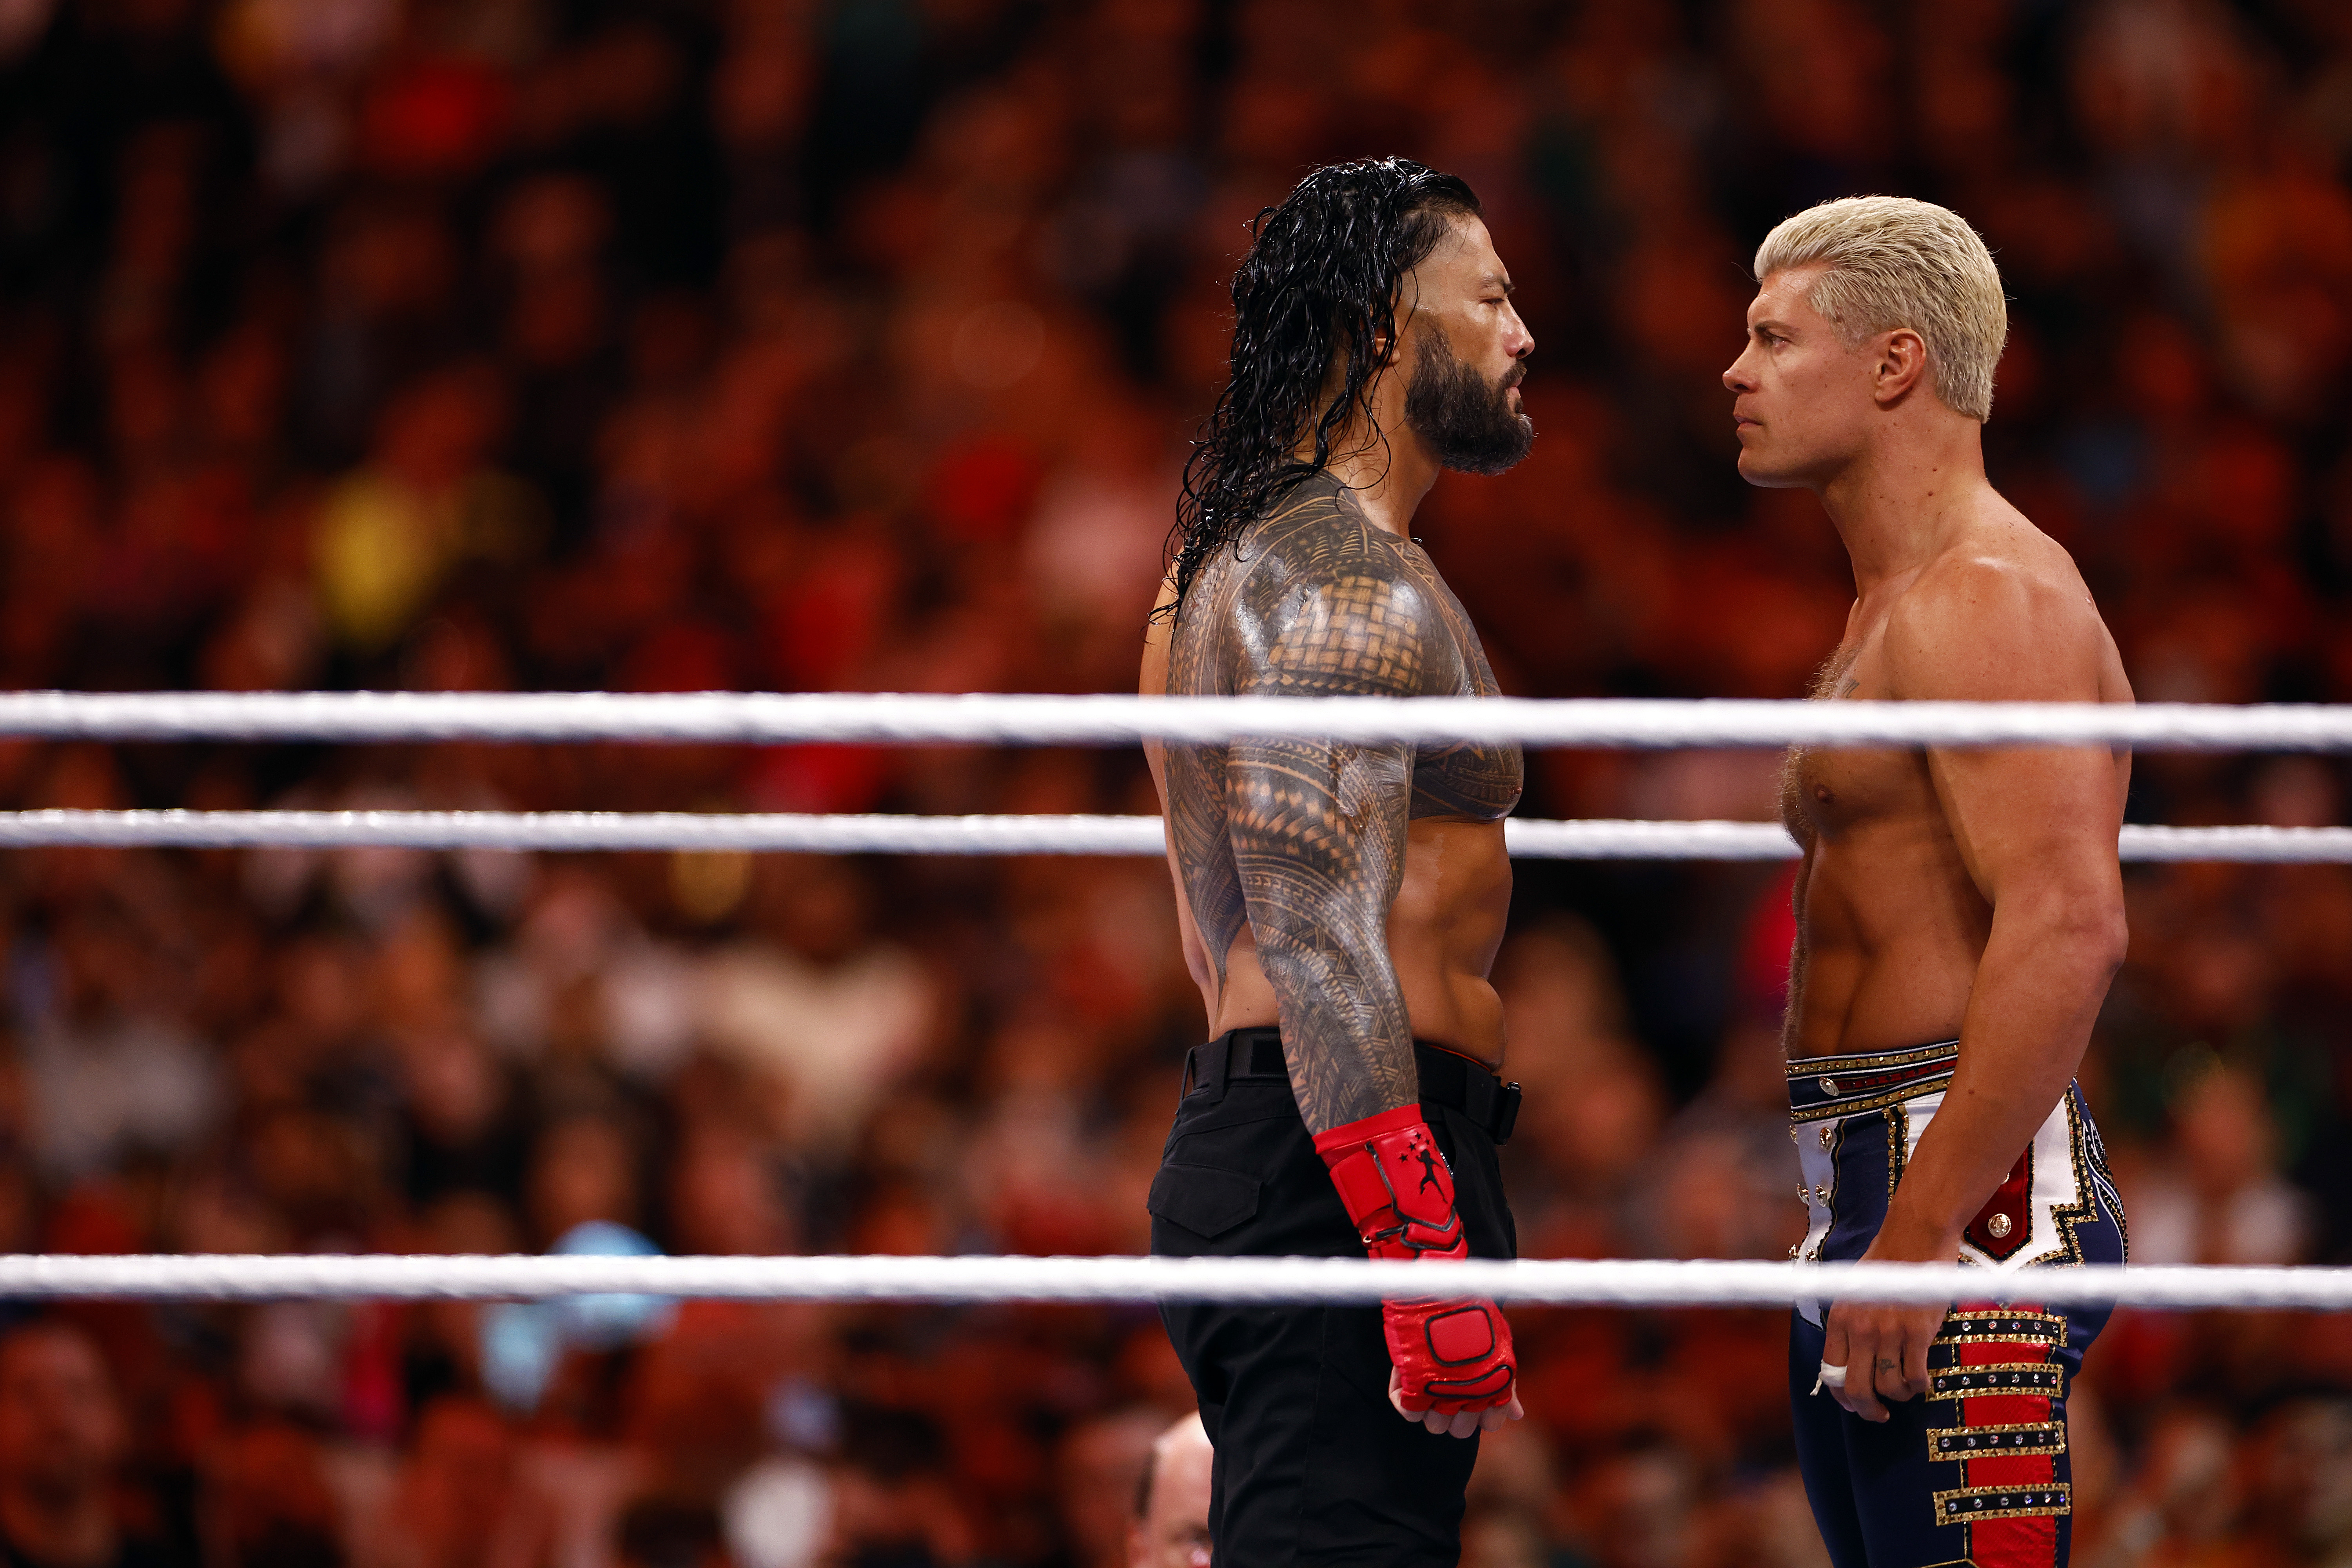 Roman Reigns and Cody Rhodes staring each other down in the ring at WrestleMania 39.